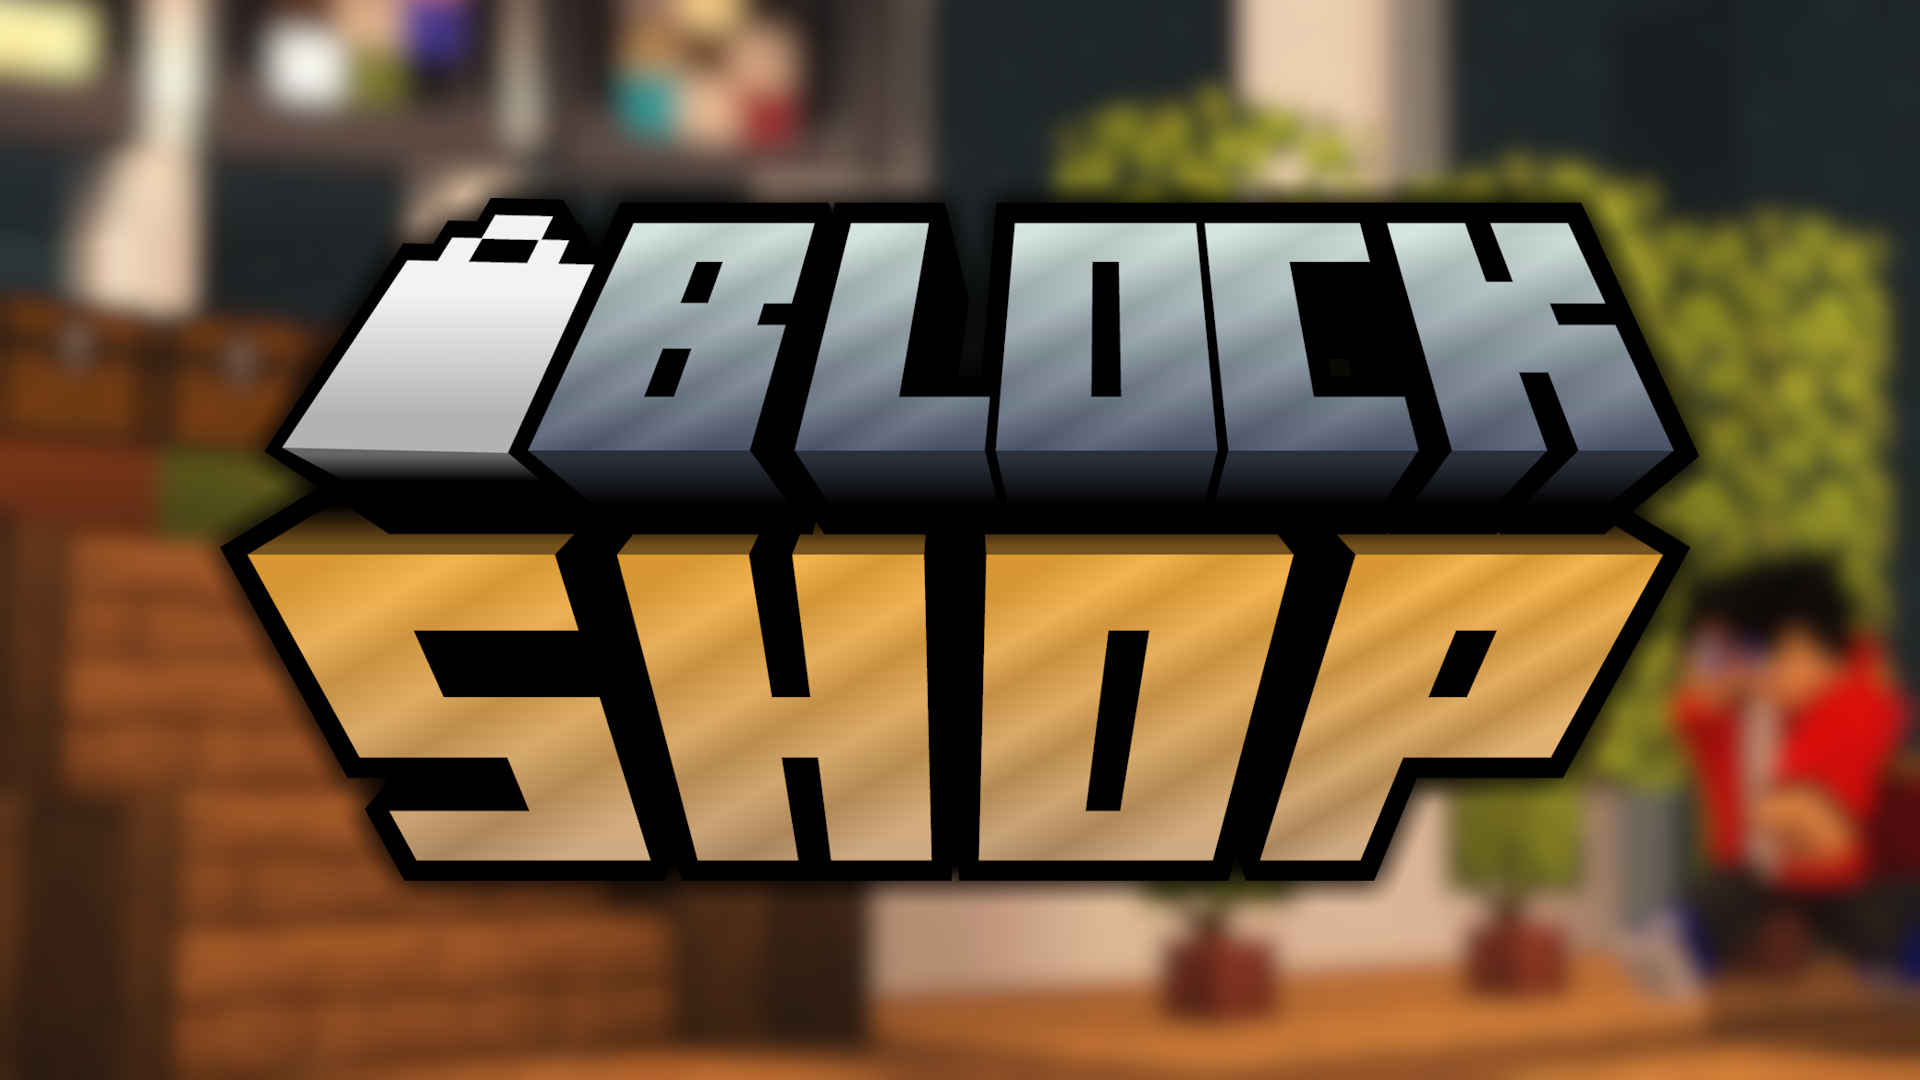 The logo for Block Shop, a Minecraft Map for 1.19.4 by TheHappywheels1